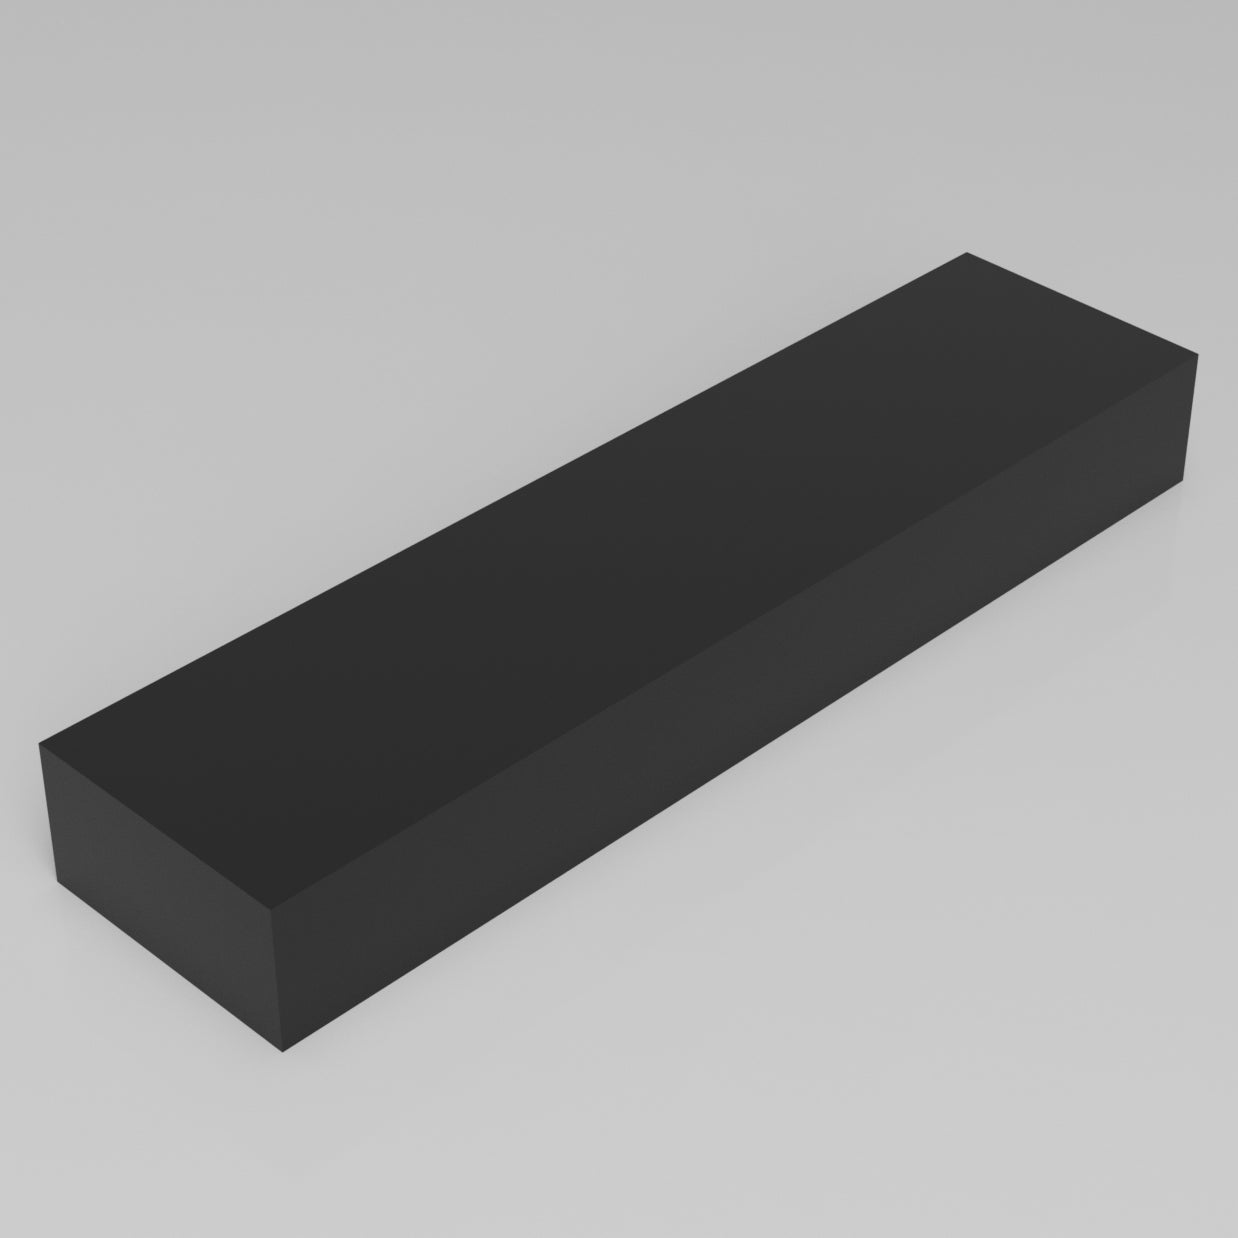 Machinable Wax Rectangular Block Front View 3 Inch by 6 Inch by 24 Inch